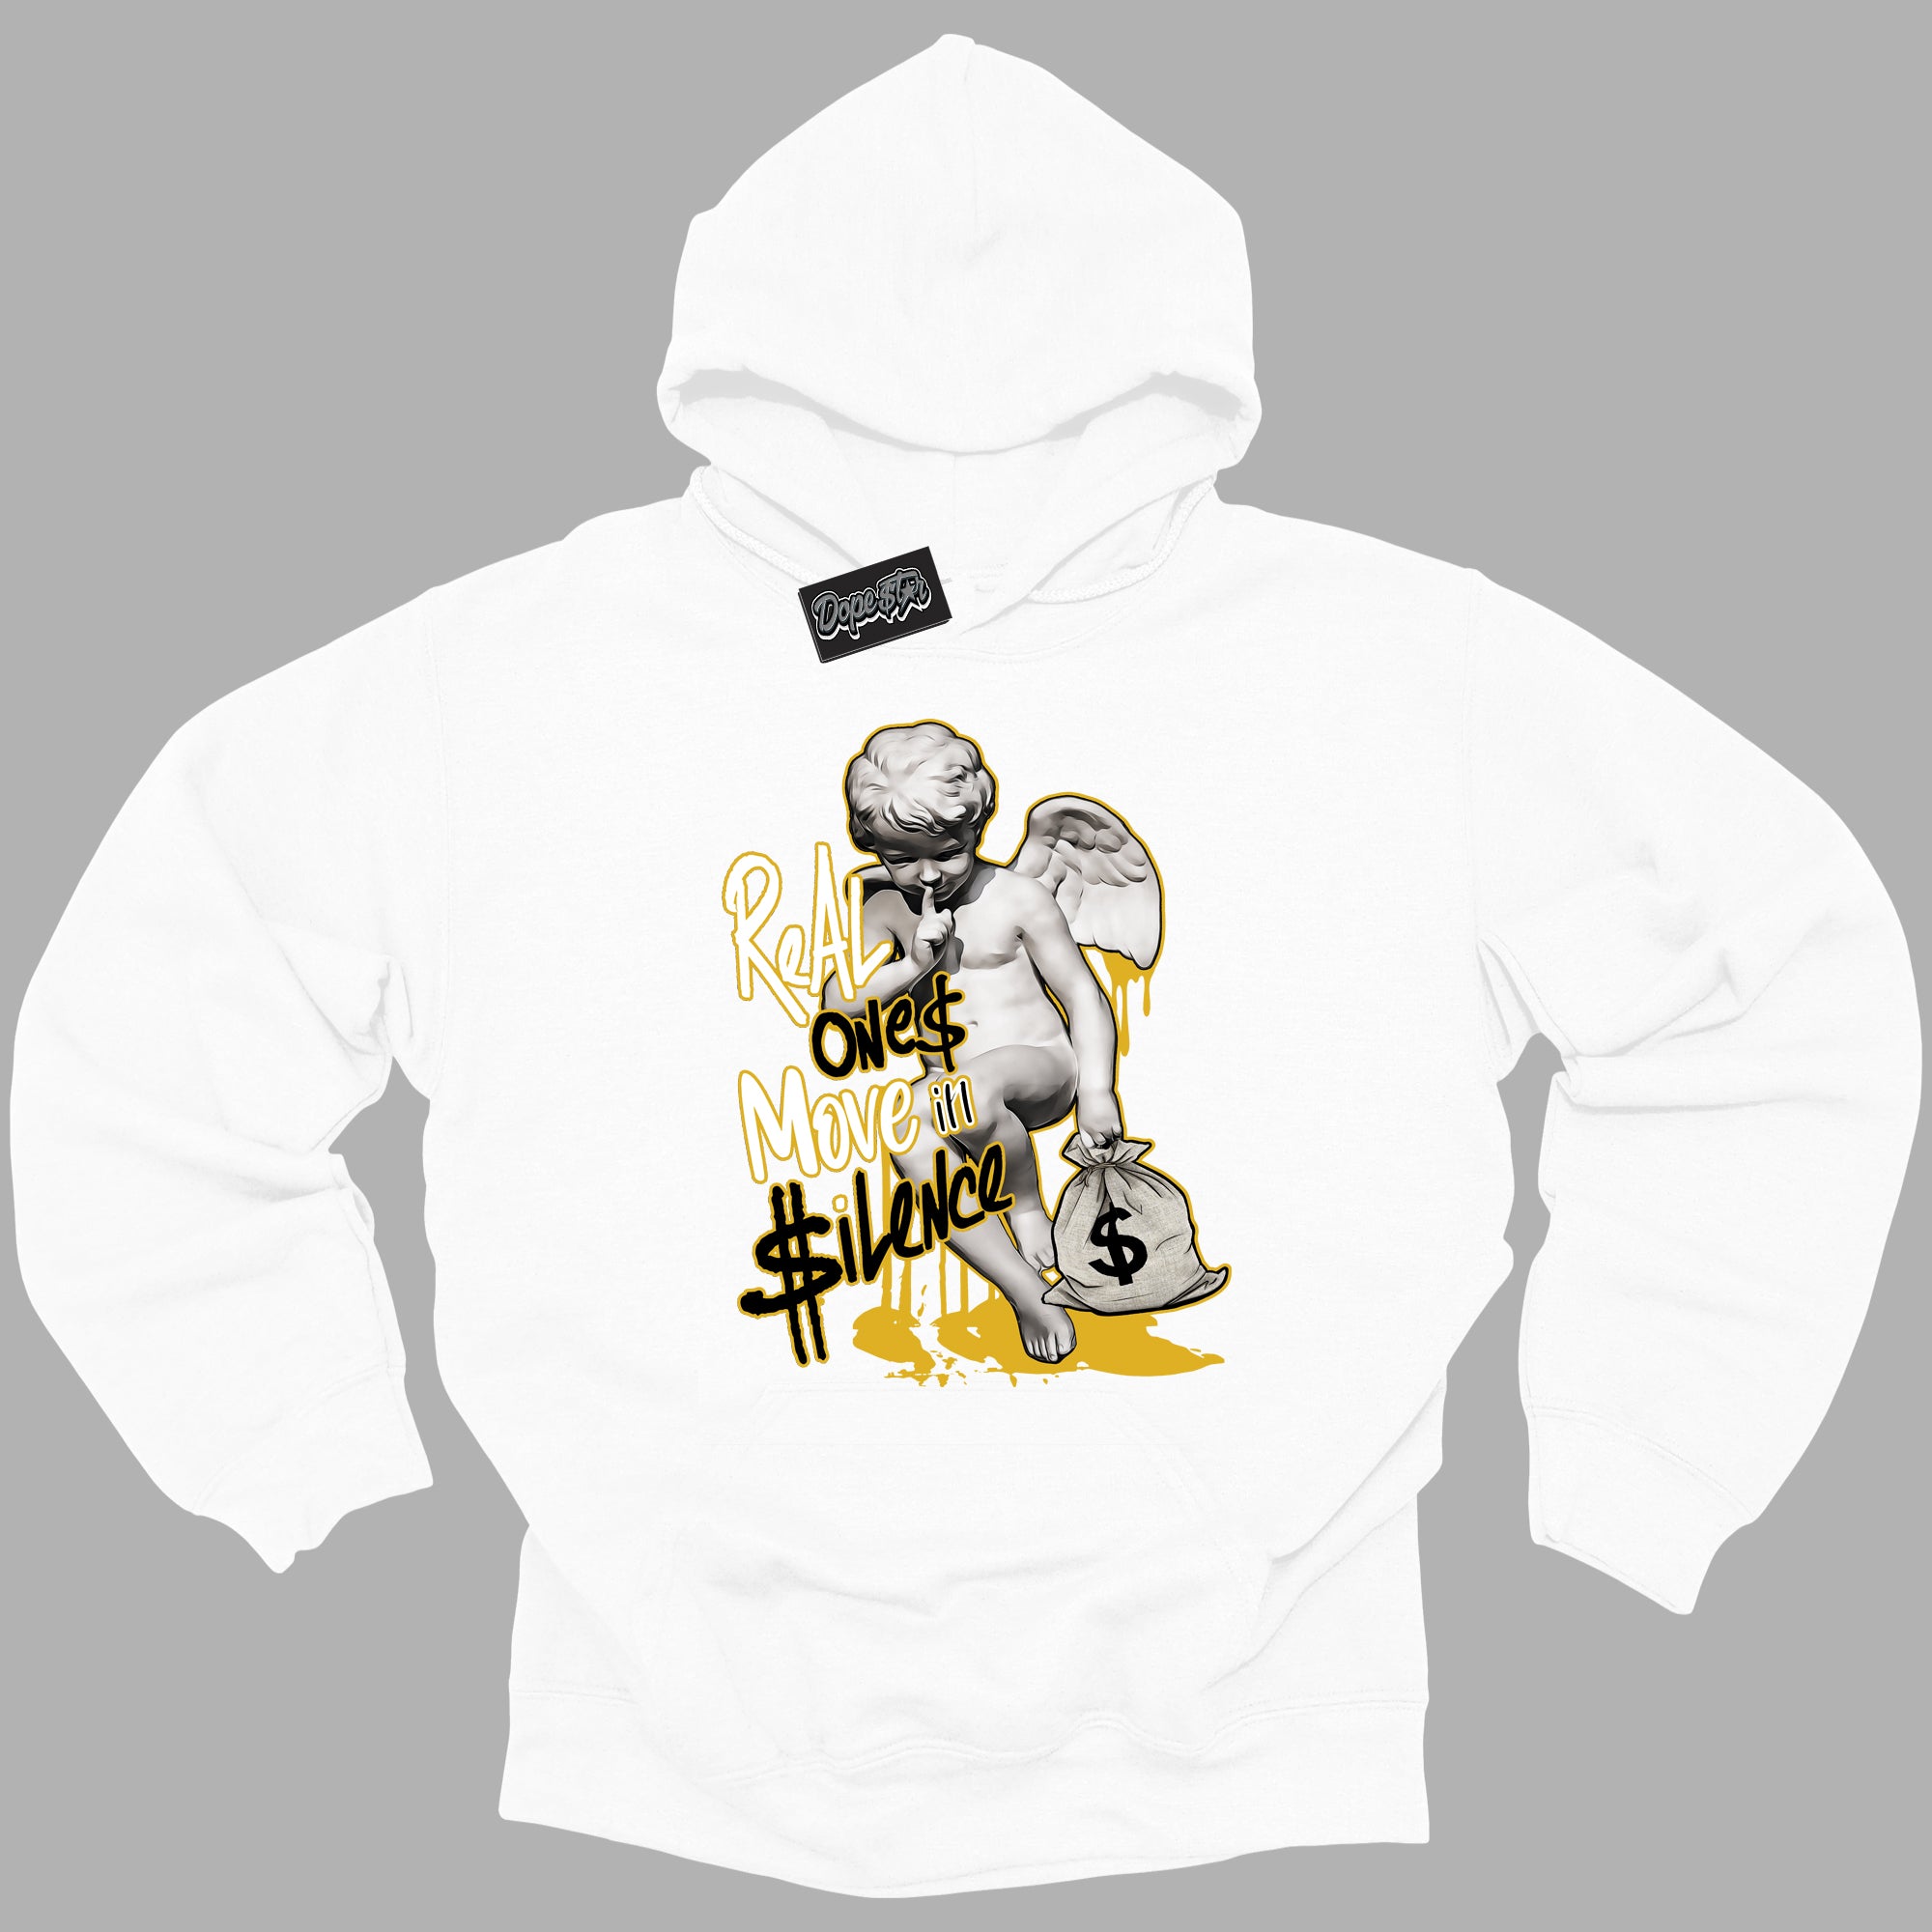 Cool White Hoodie with “ Real Ones Cherub ”  design that Perfectly Matches Yellow Ochre 6s Sneakers.